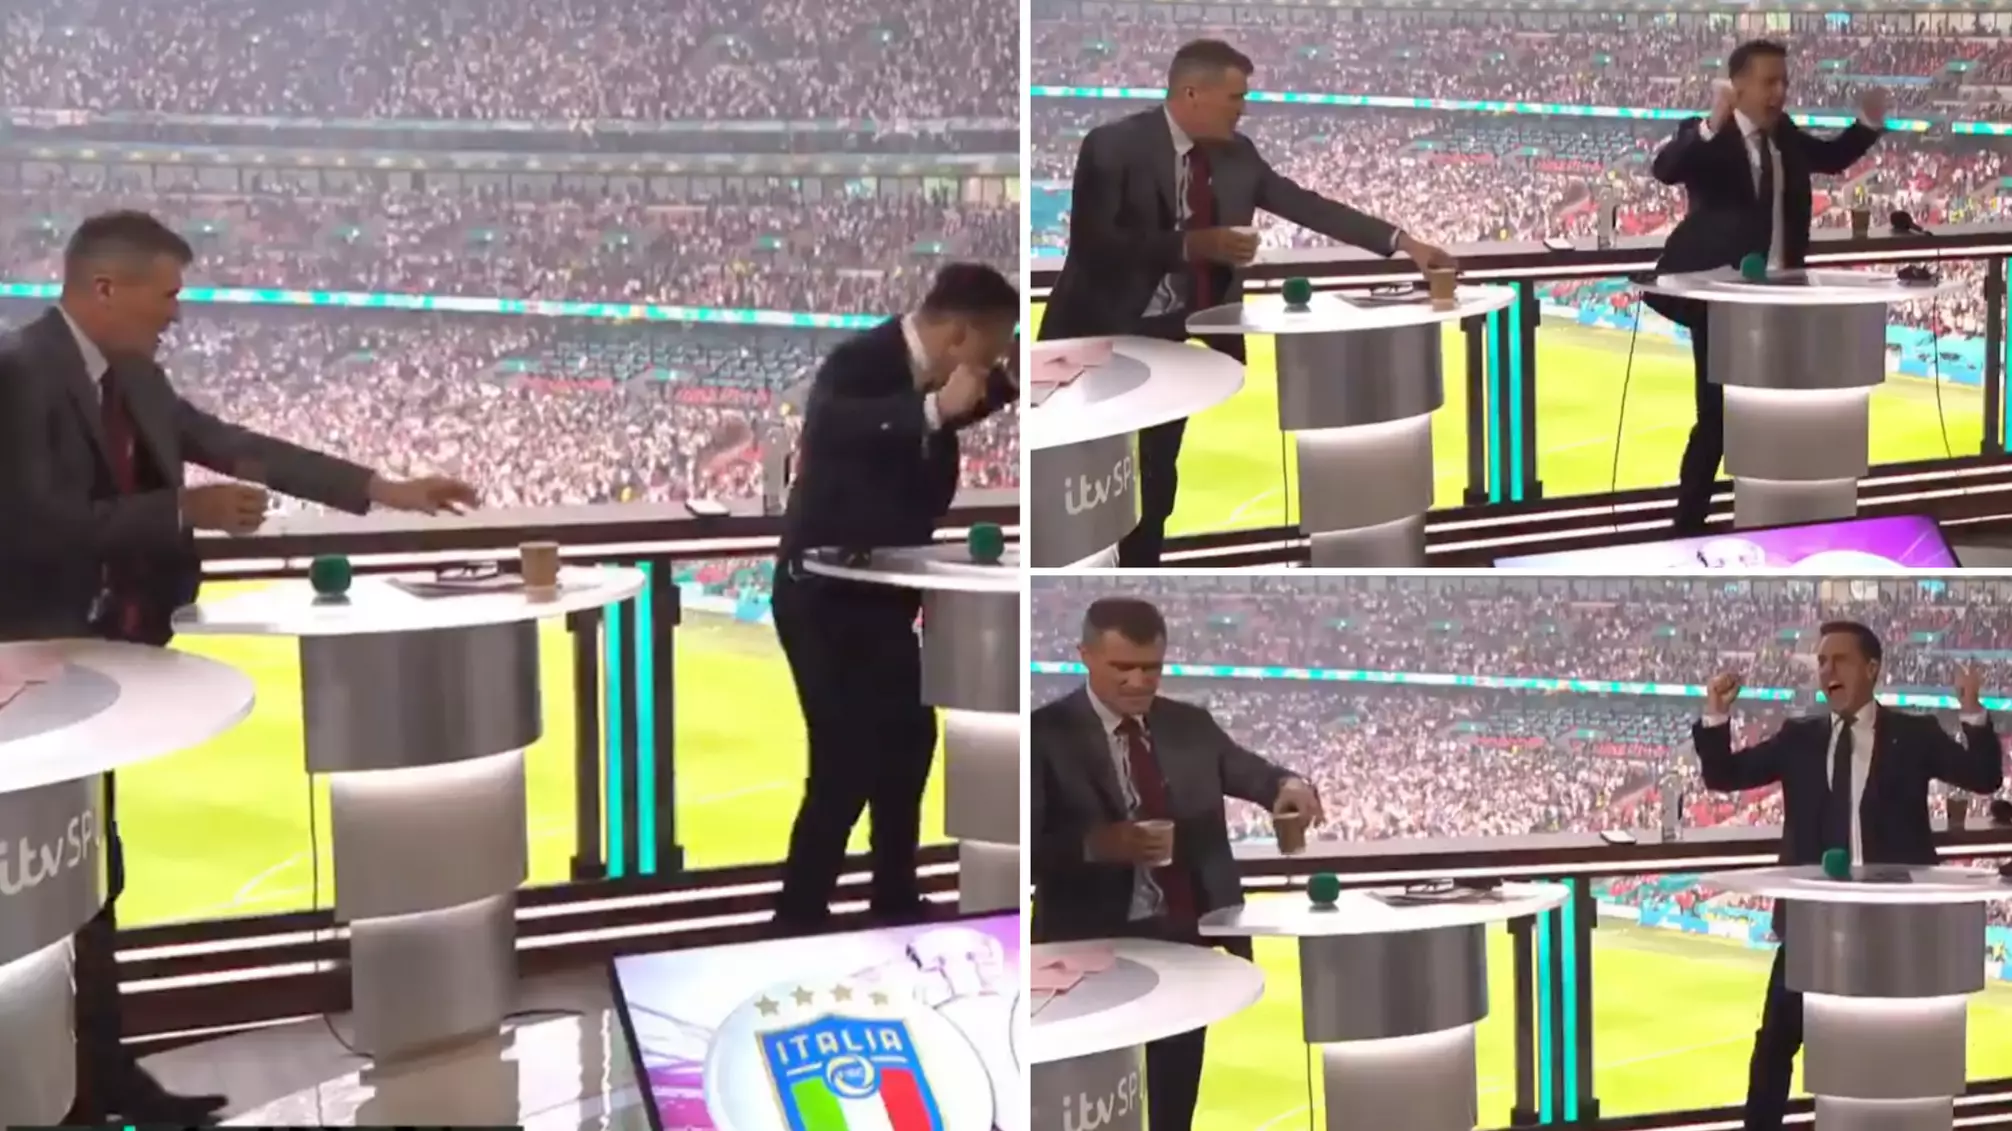 Roy Keane's Reaction To England's Opener In Euro 2020 Final Was Priceless